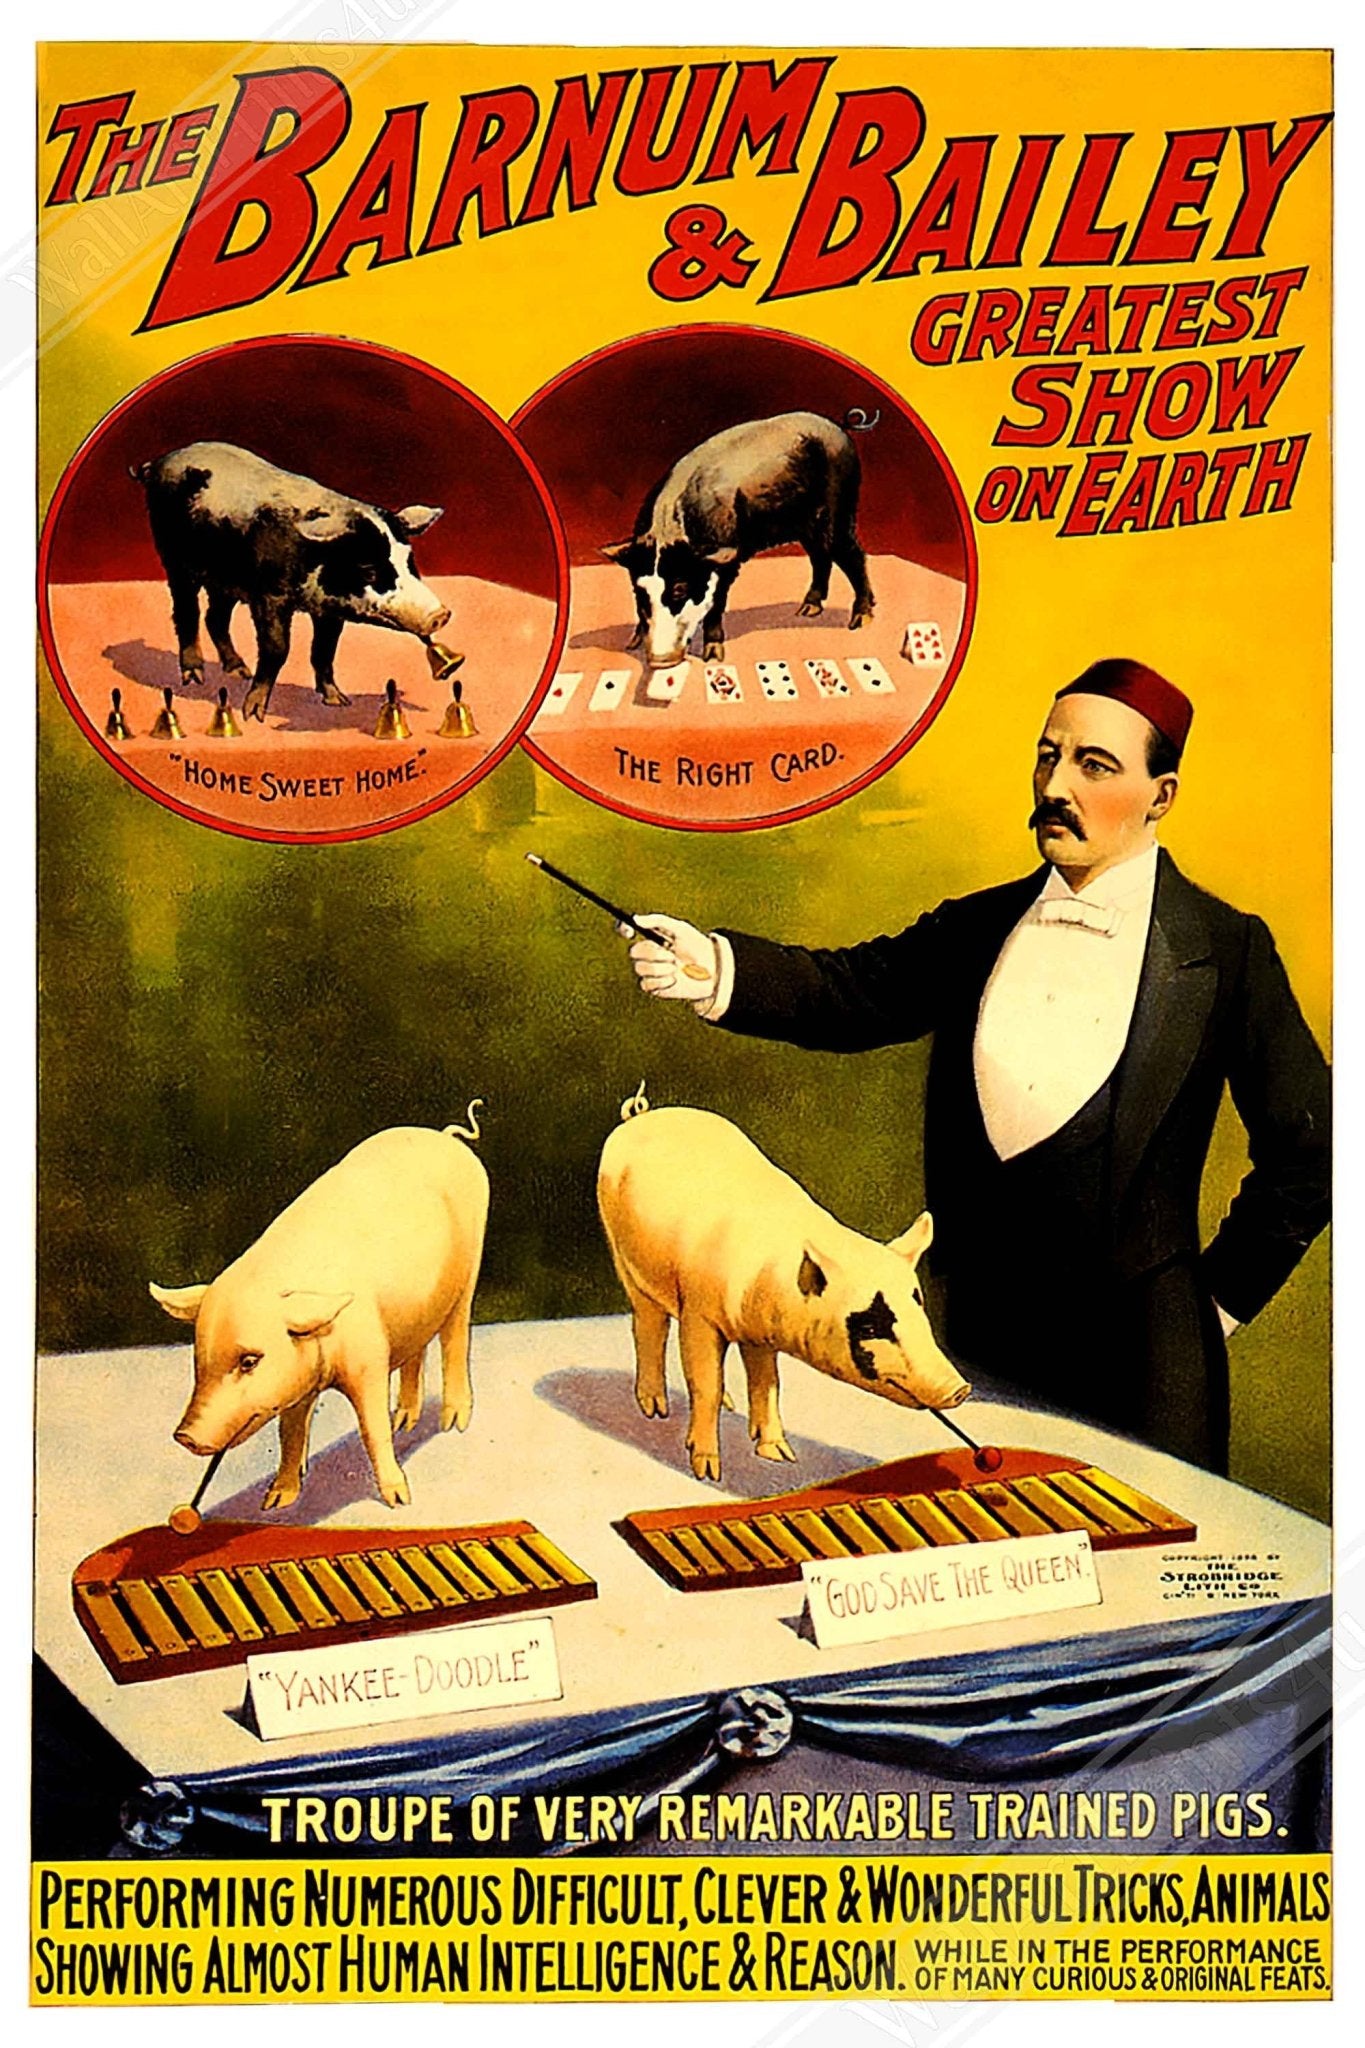 Vintage Circus Poster, Remarkable Pigs Barnum & Bailey, Greates Show On Earth, From 1898. - WallArtPrints4U